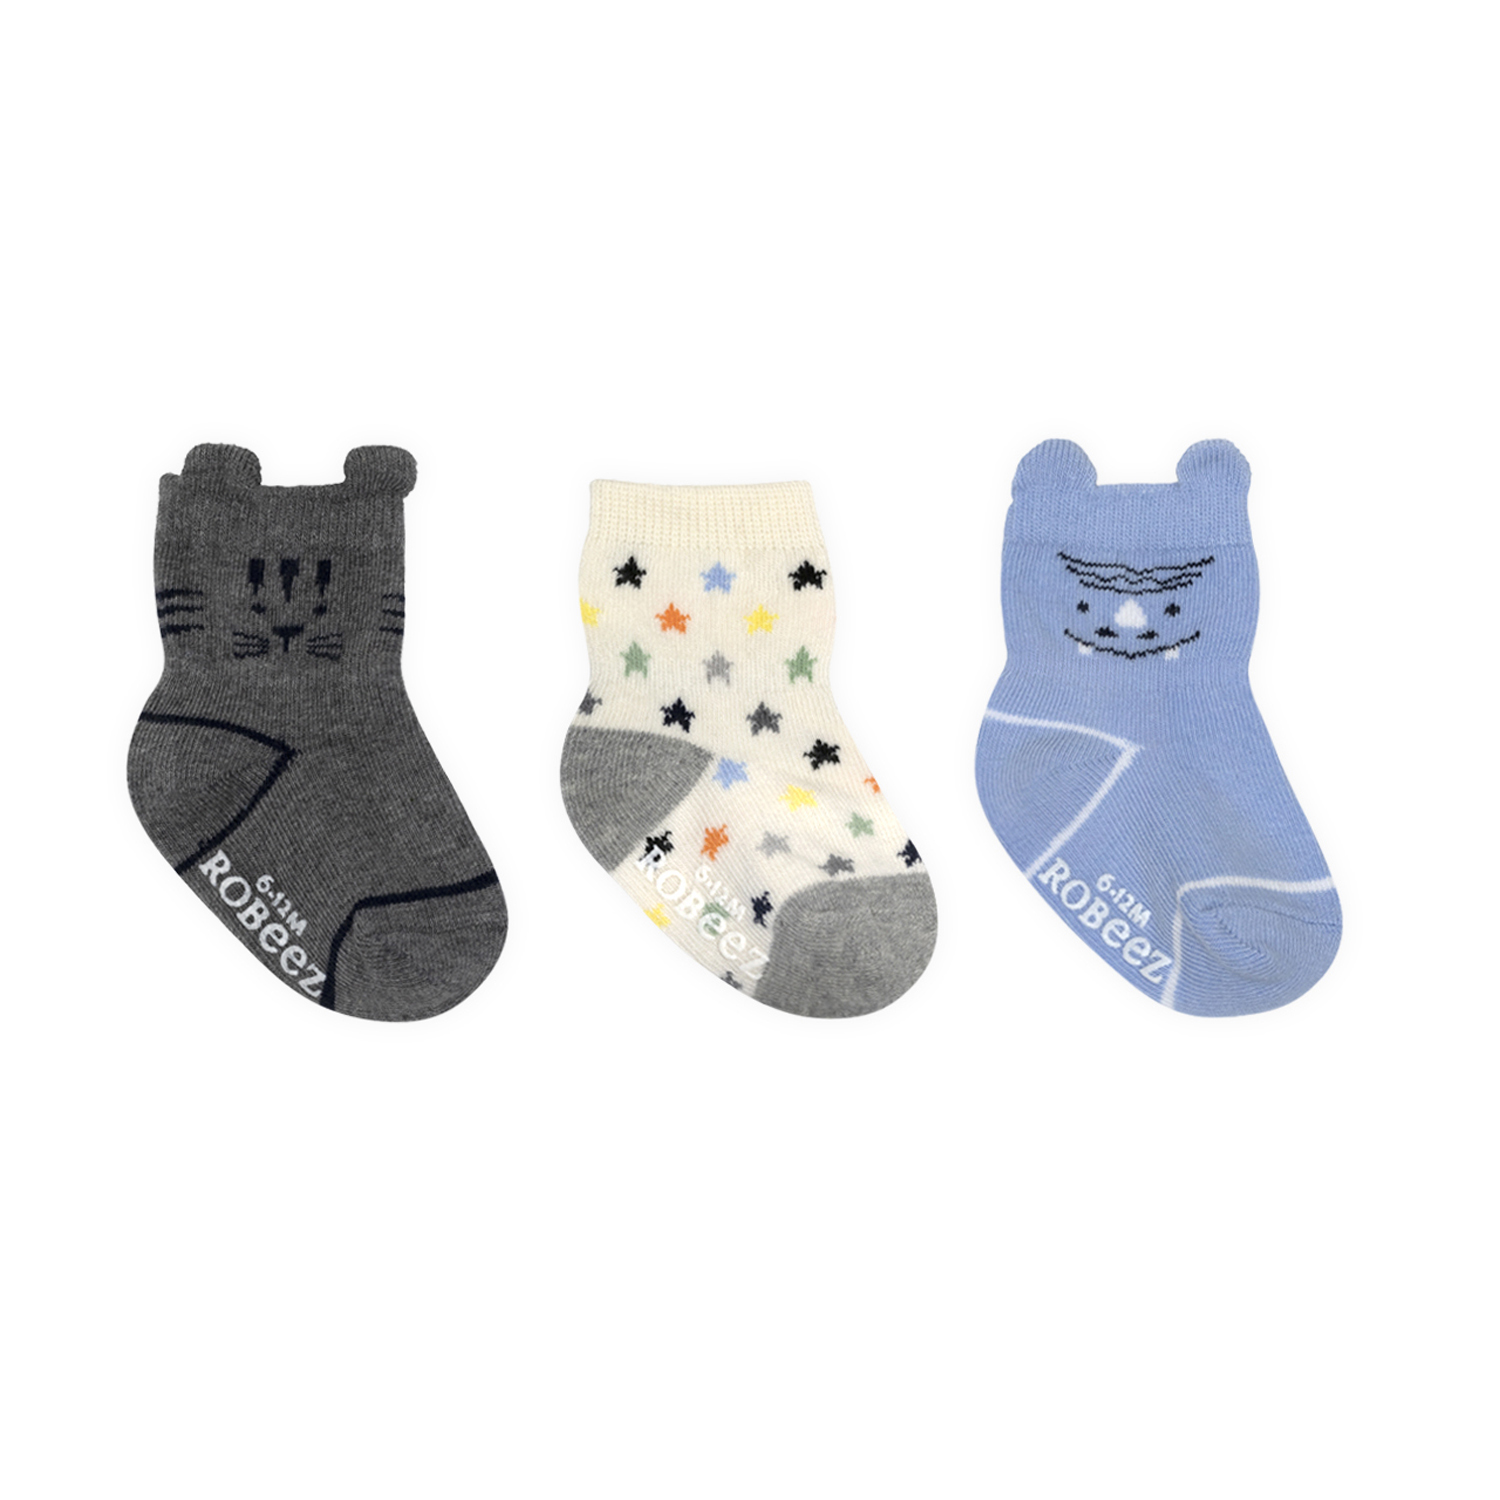 Robeez Pretty Cables Socks, 3 Pack